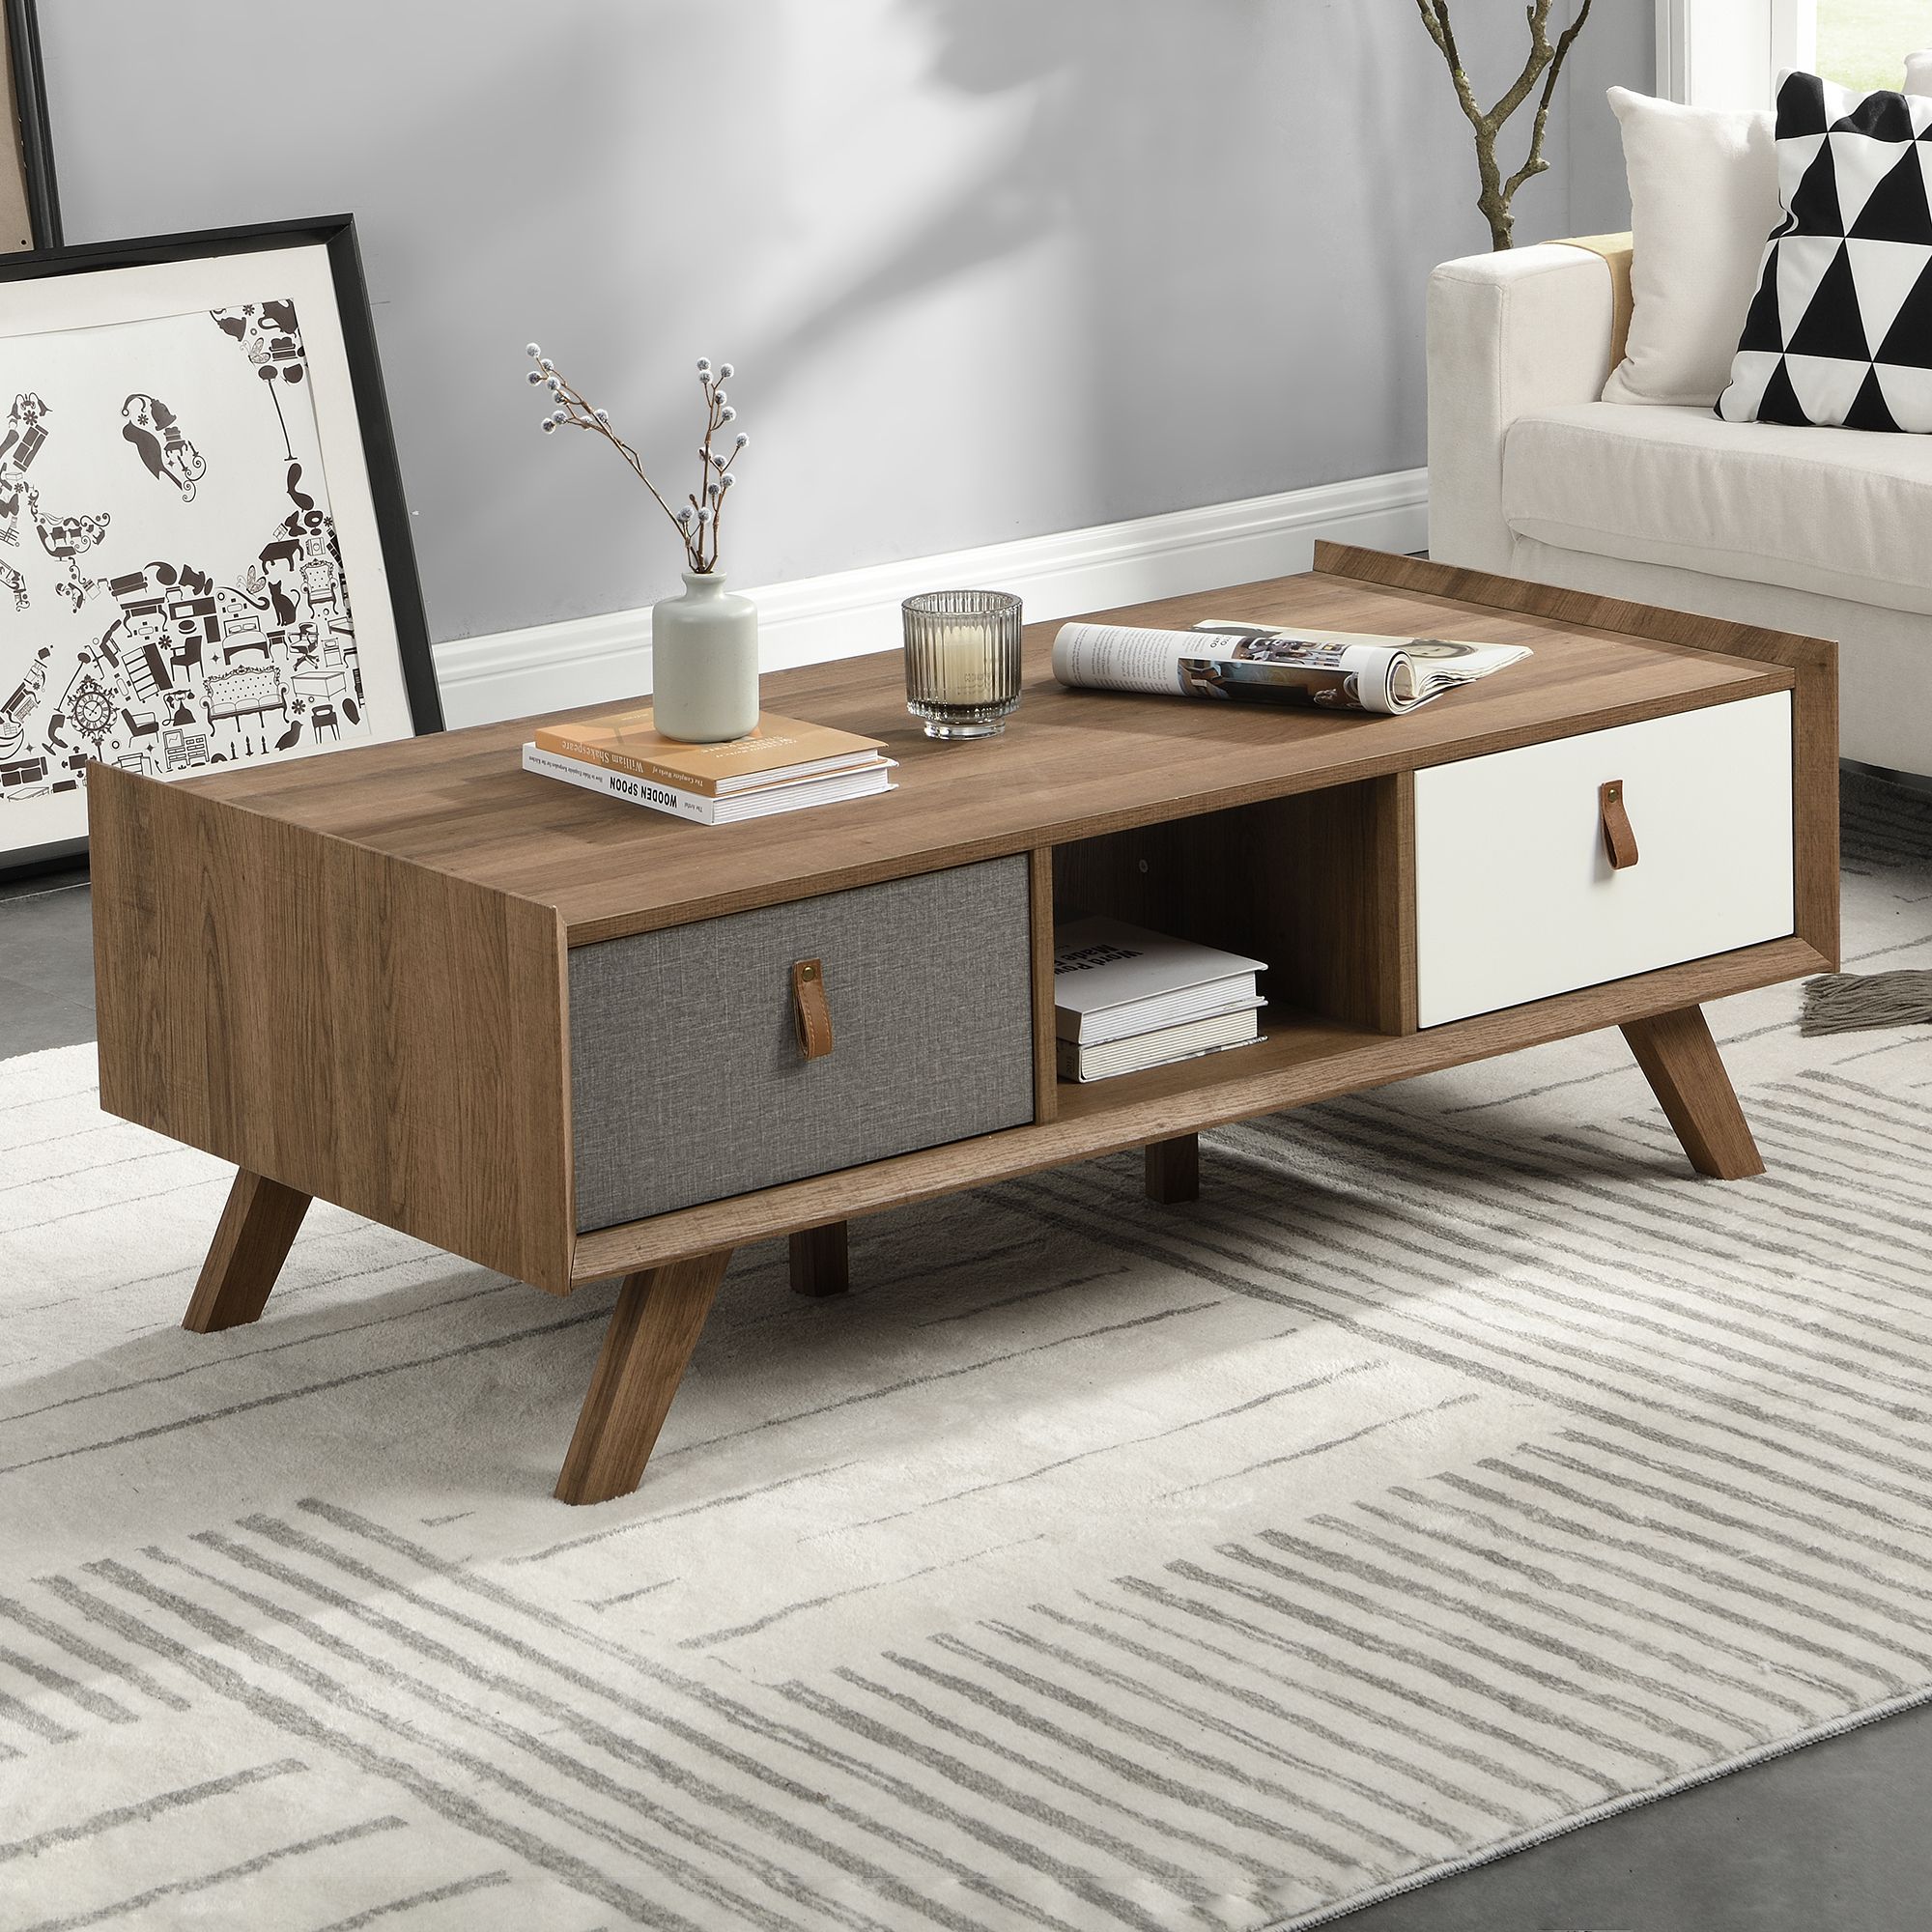 Core Living Diana 2 Drawer Coffee Table | Temple & Webster Within 2 Drawer Coffee Tables (View 15 of 15)